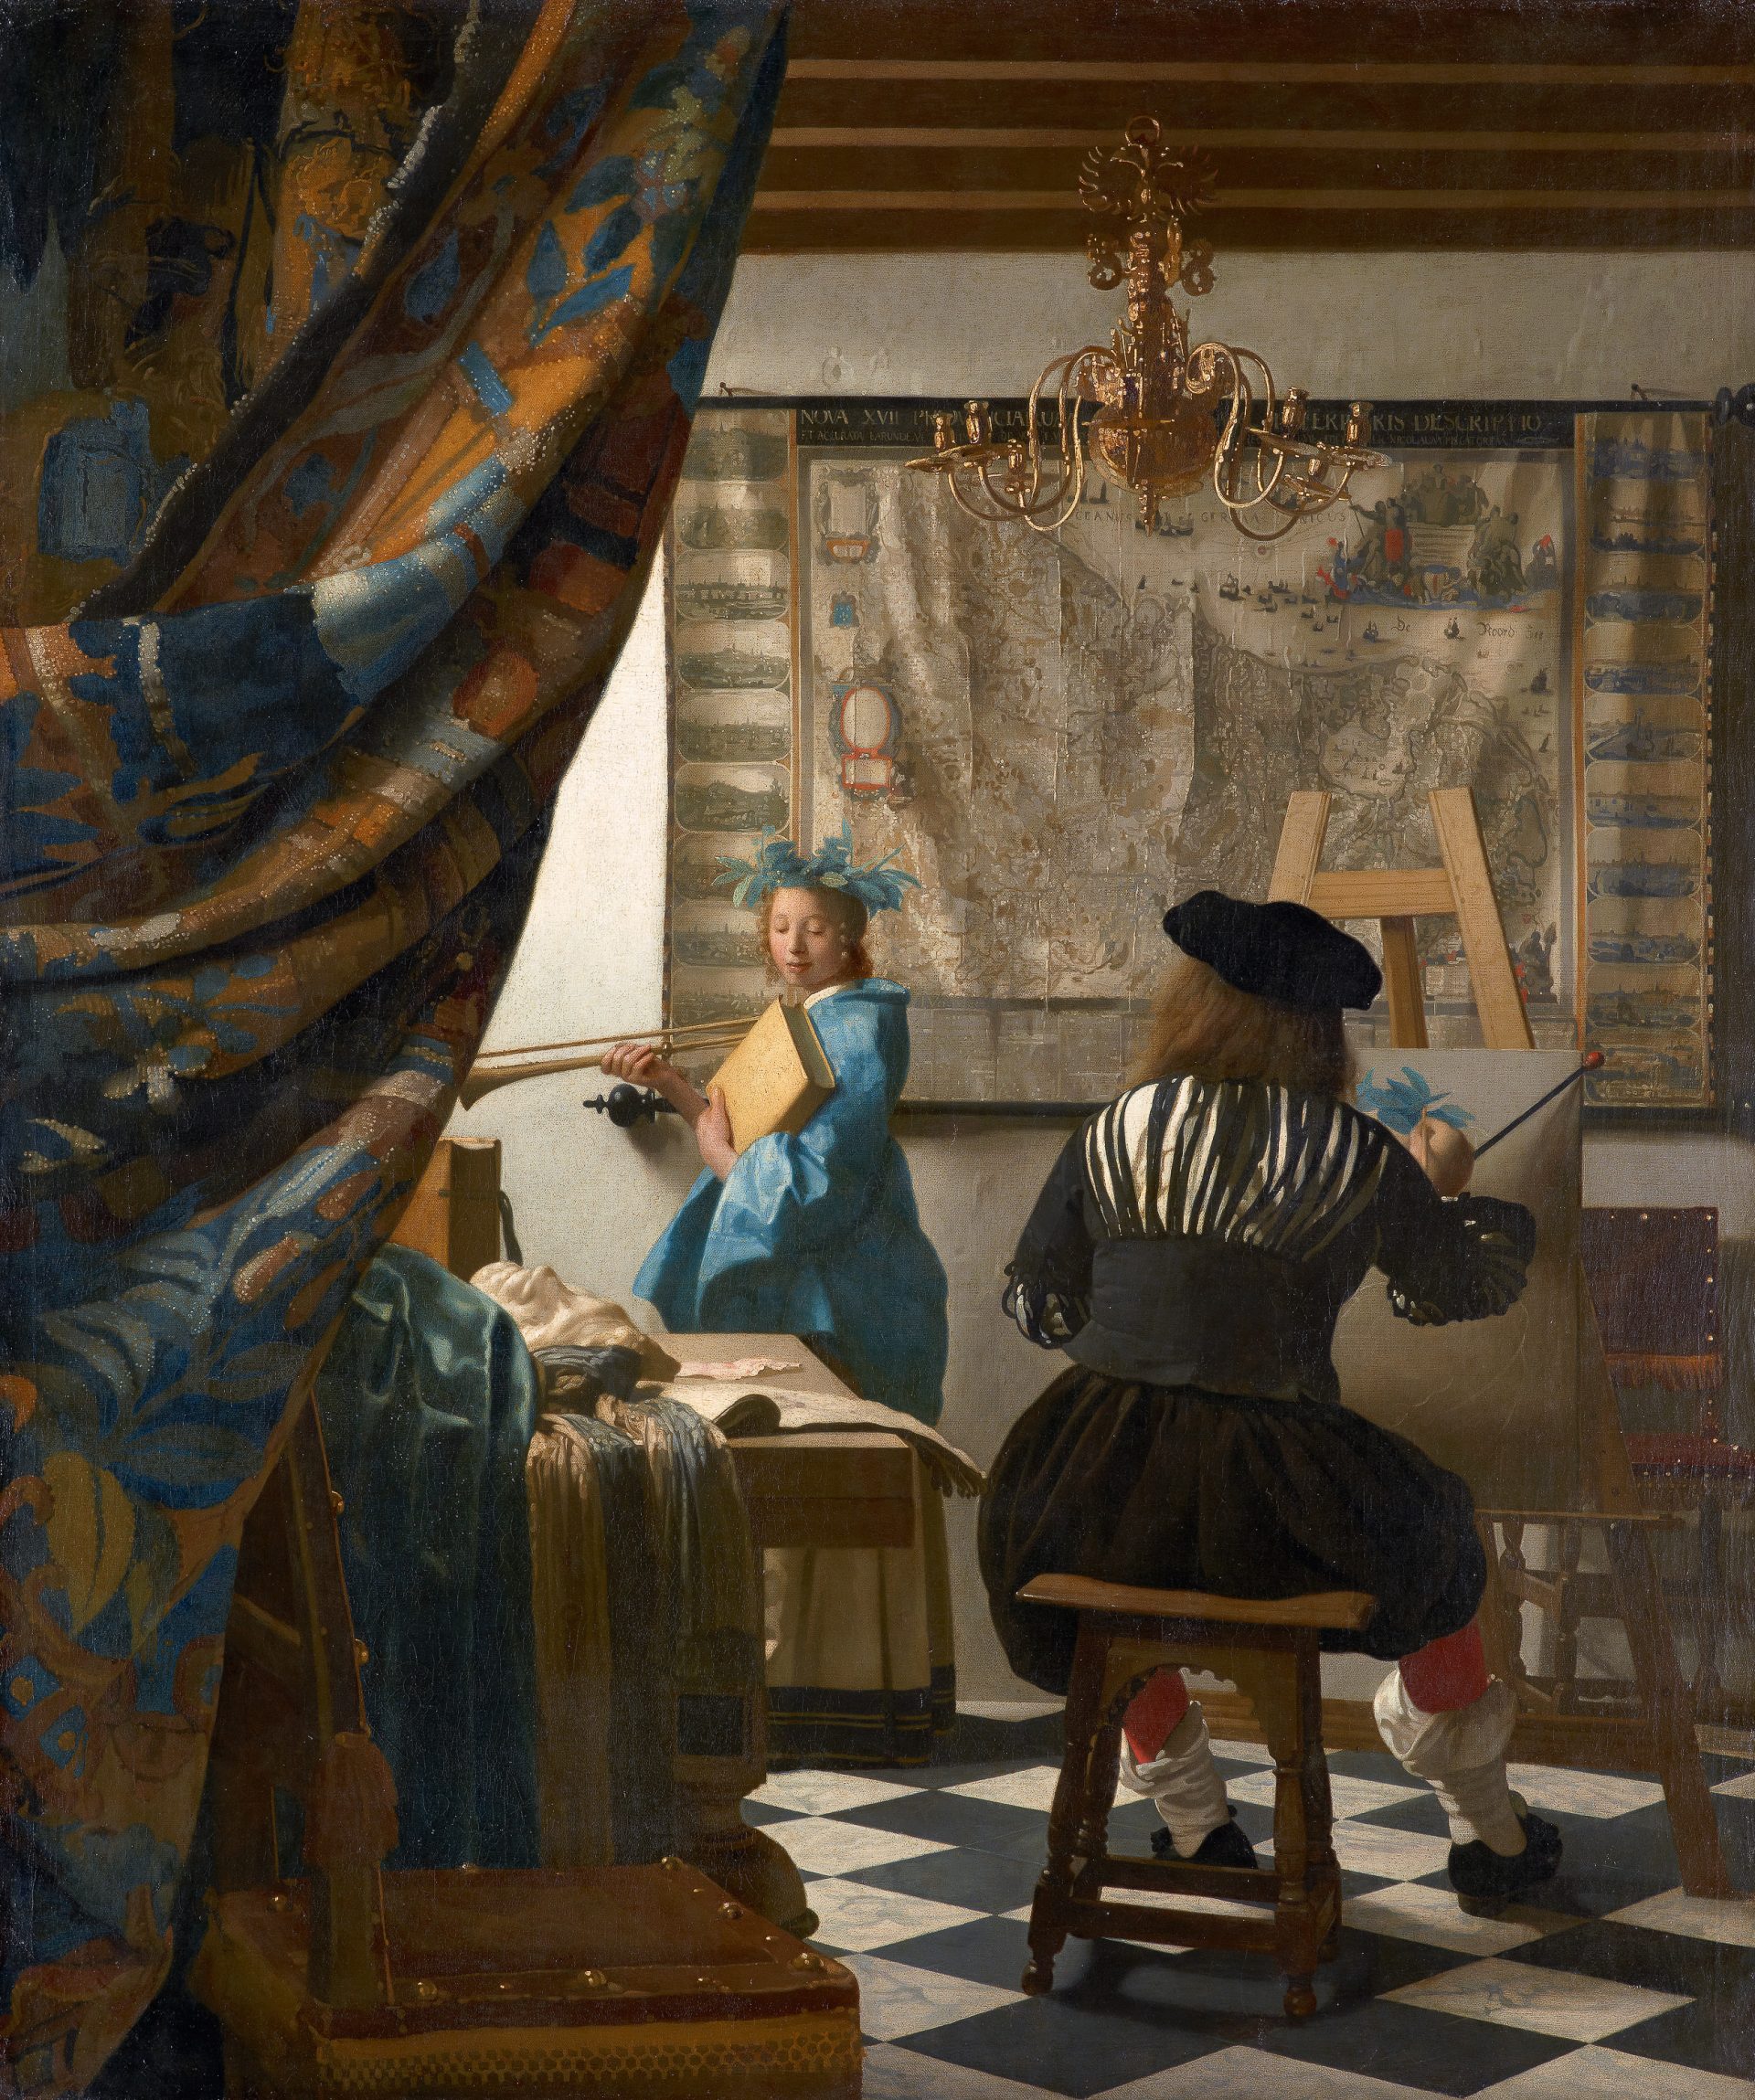 This artwork portrays an artist in his studio, capturing a female model dressed in blue as she poses near a window. A prominent map of the Low Countries serves as the backdrop on the wall behind her.